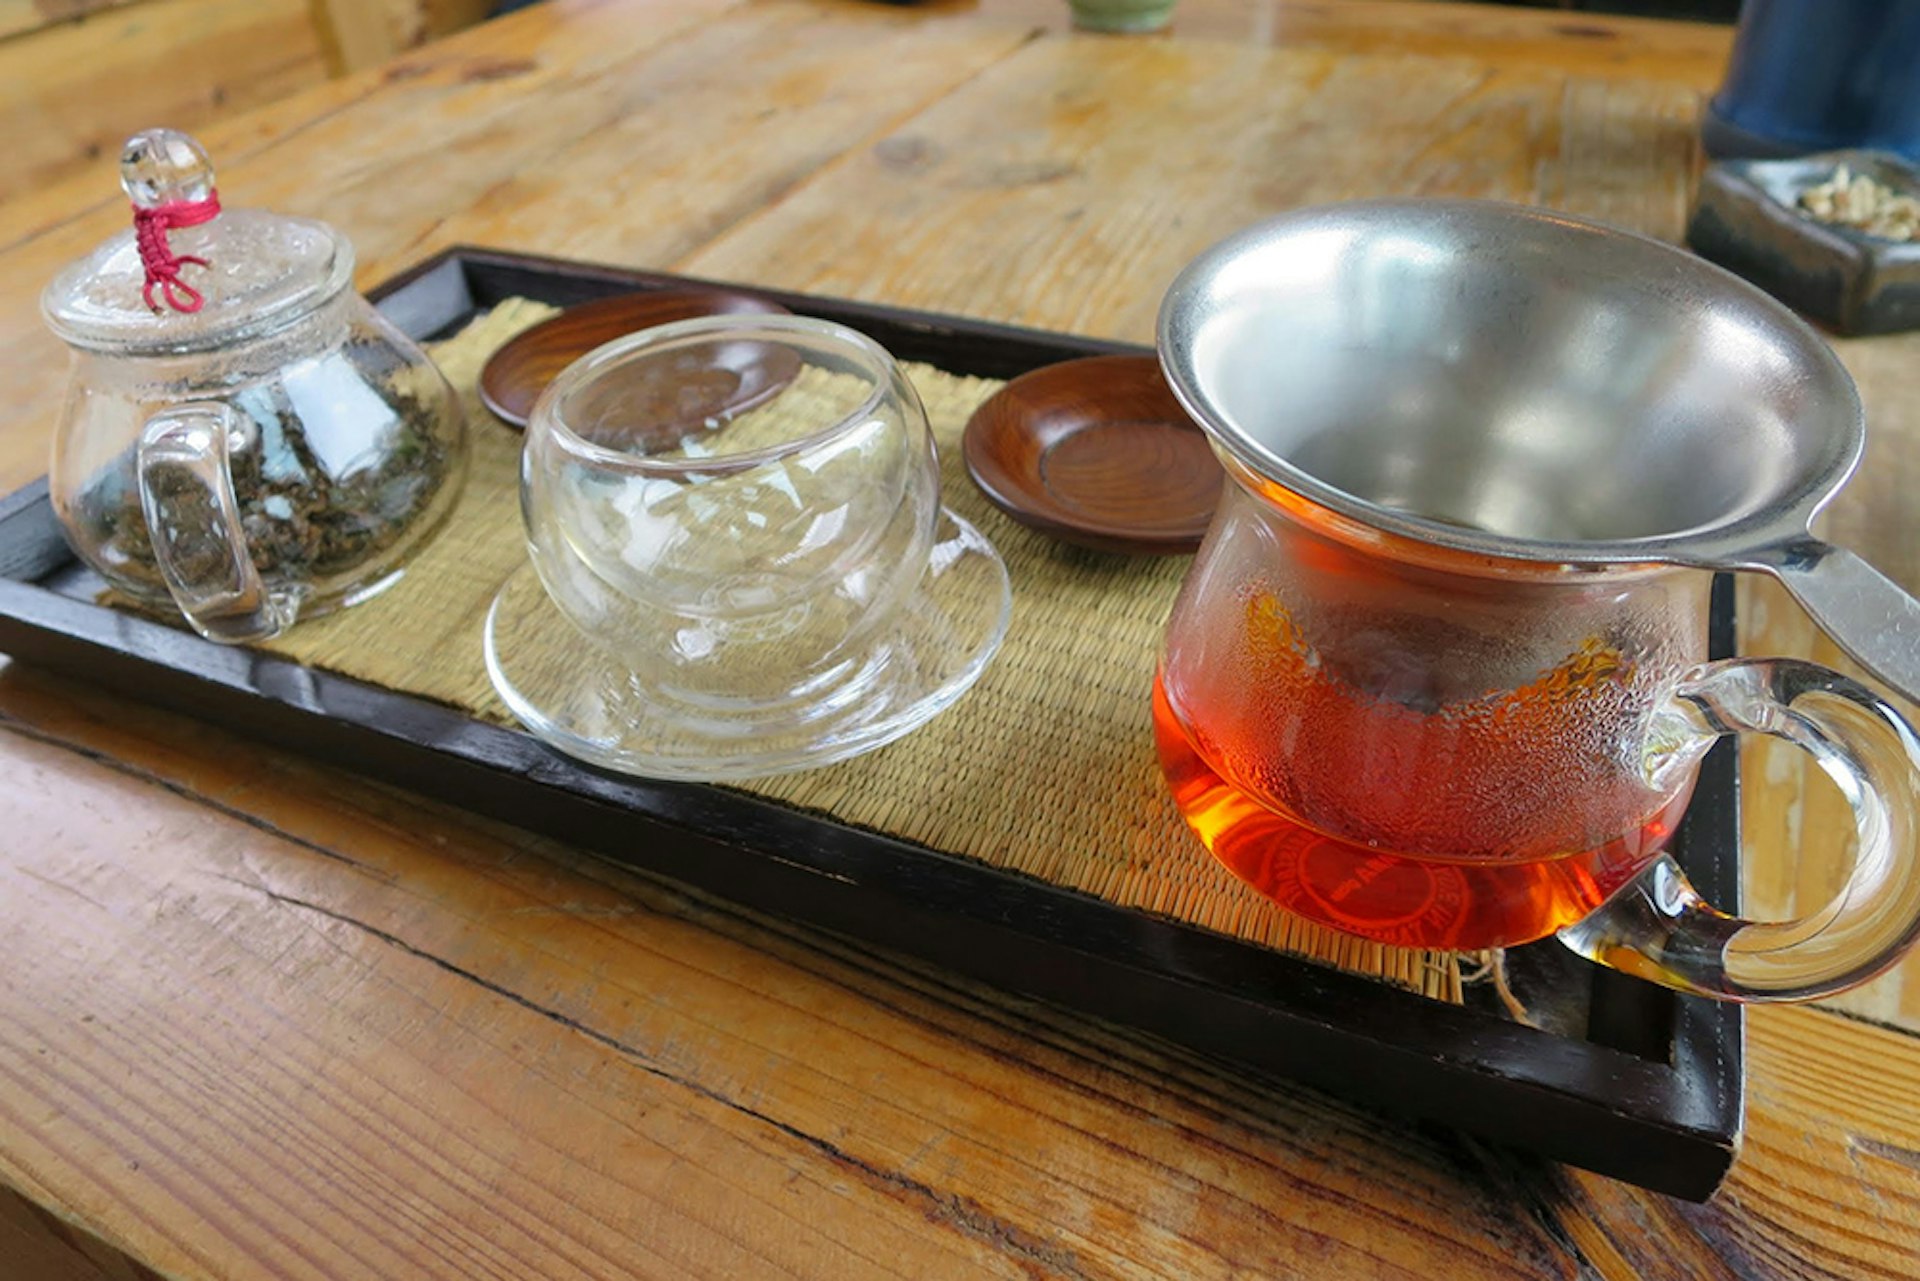 Traditional Korean tea. Image by Megan Eaves / Lonely Planet